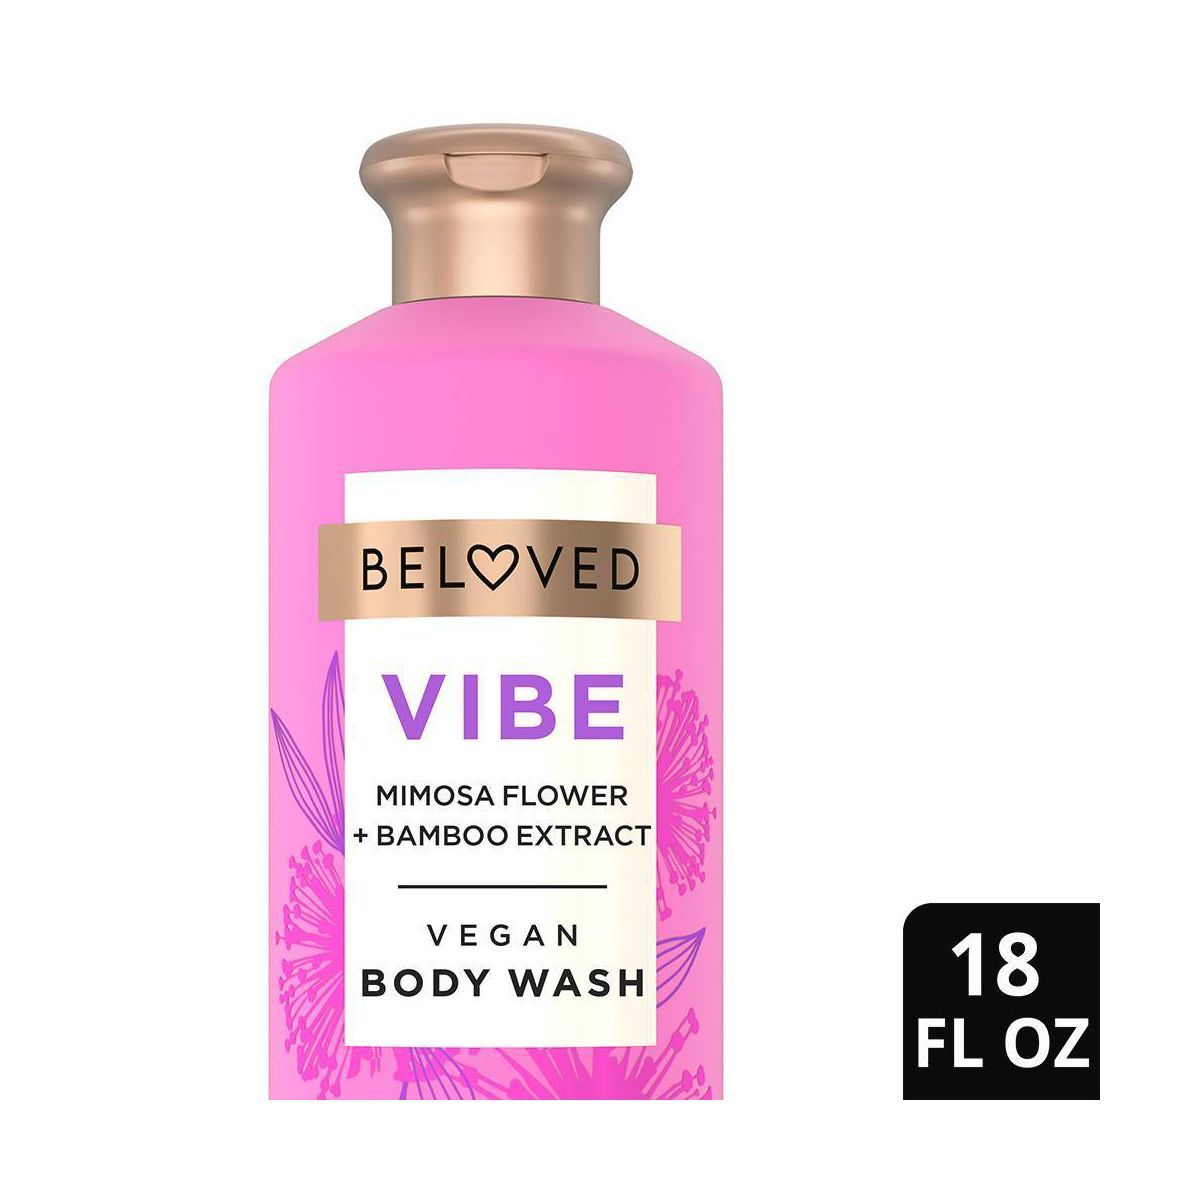 Beloved Vibe Vegan Body Wash with Mimosa Flower & Bamboo Extract - 18 fl oz | Target